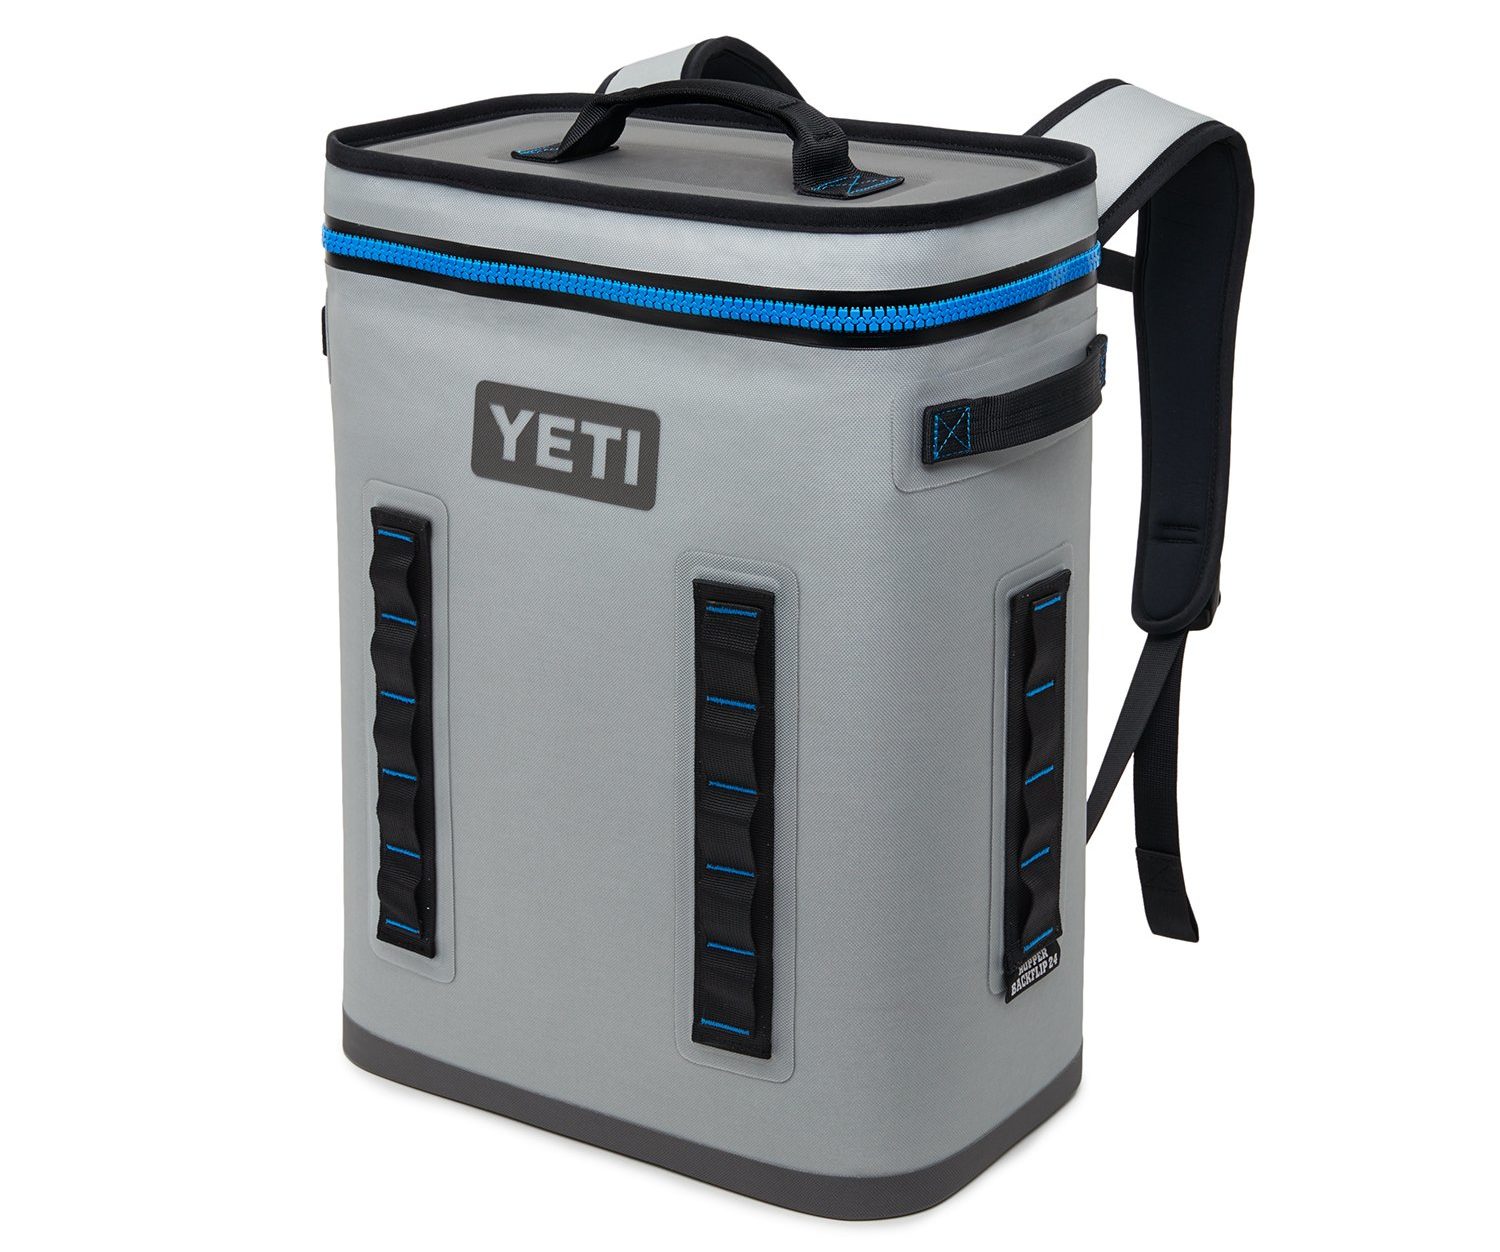 Best Gifts For Uncle 2022: YETI Backpack Cooler 2022